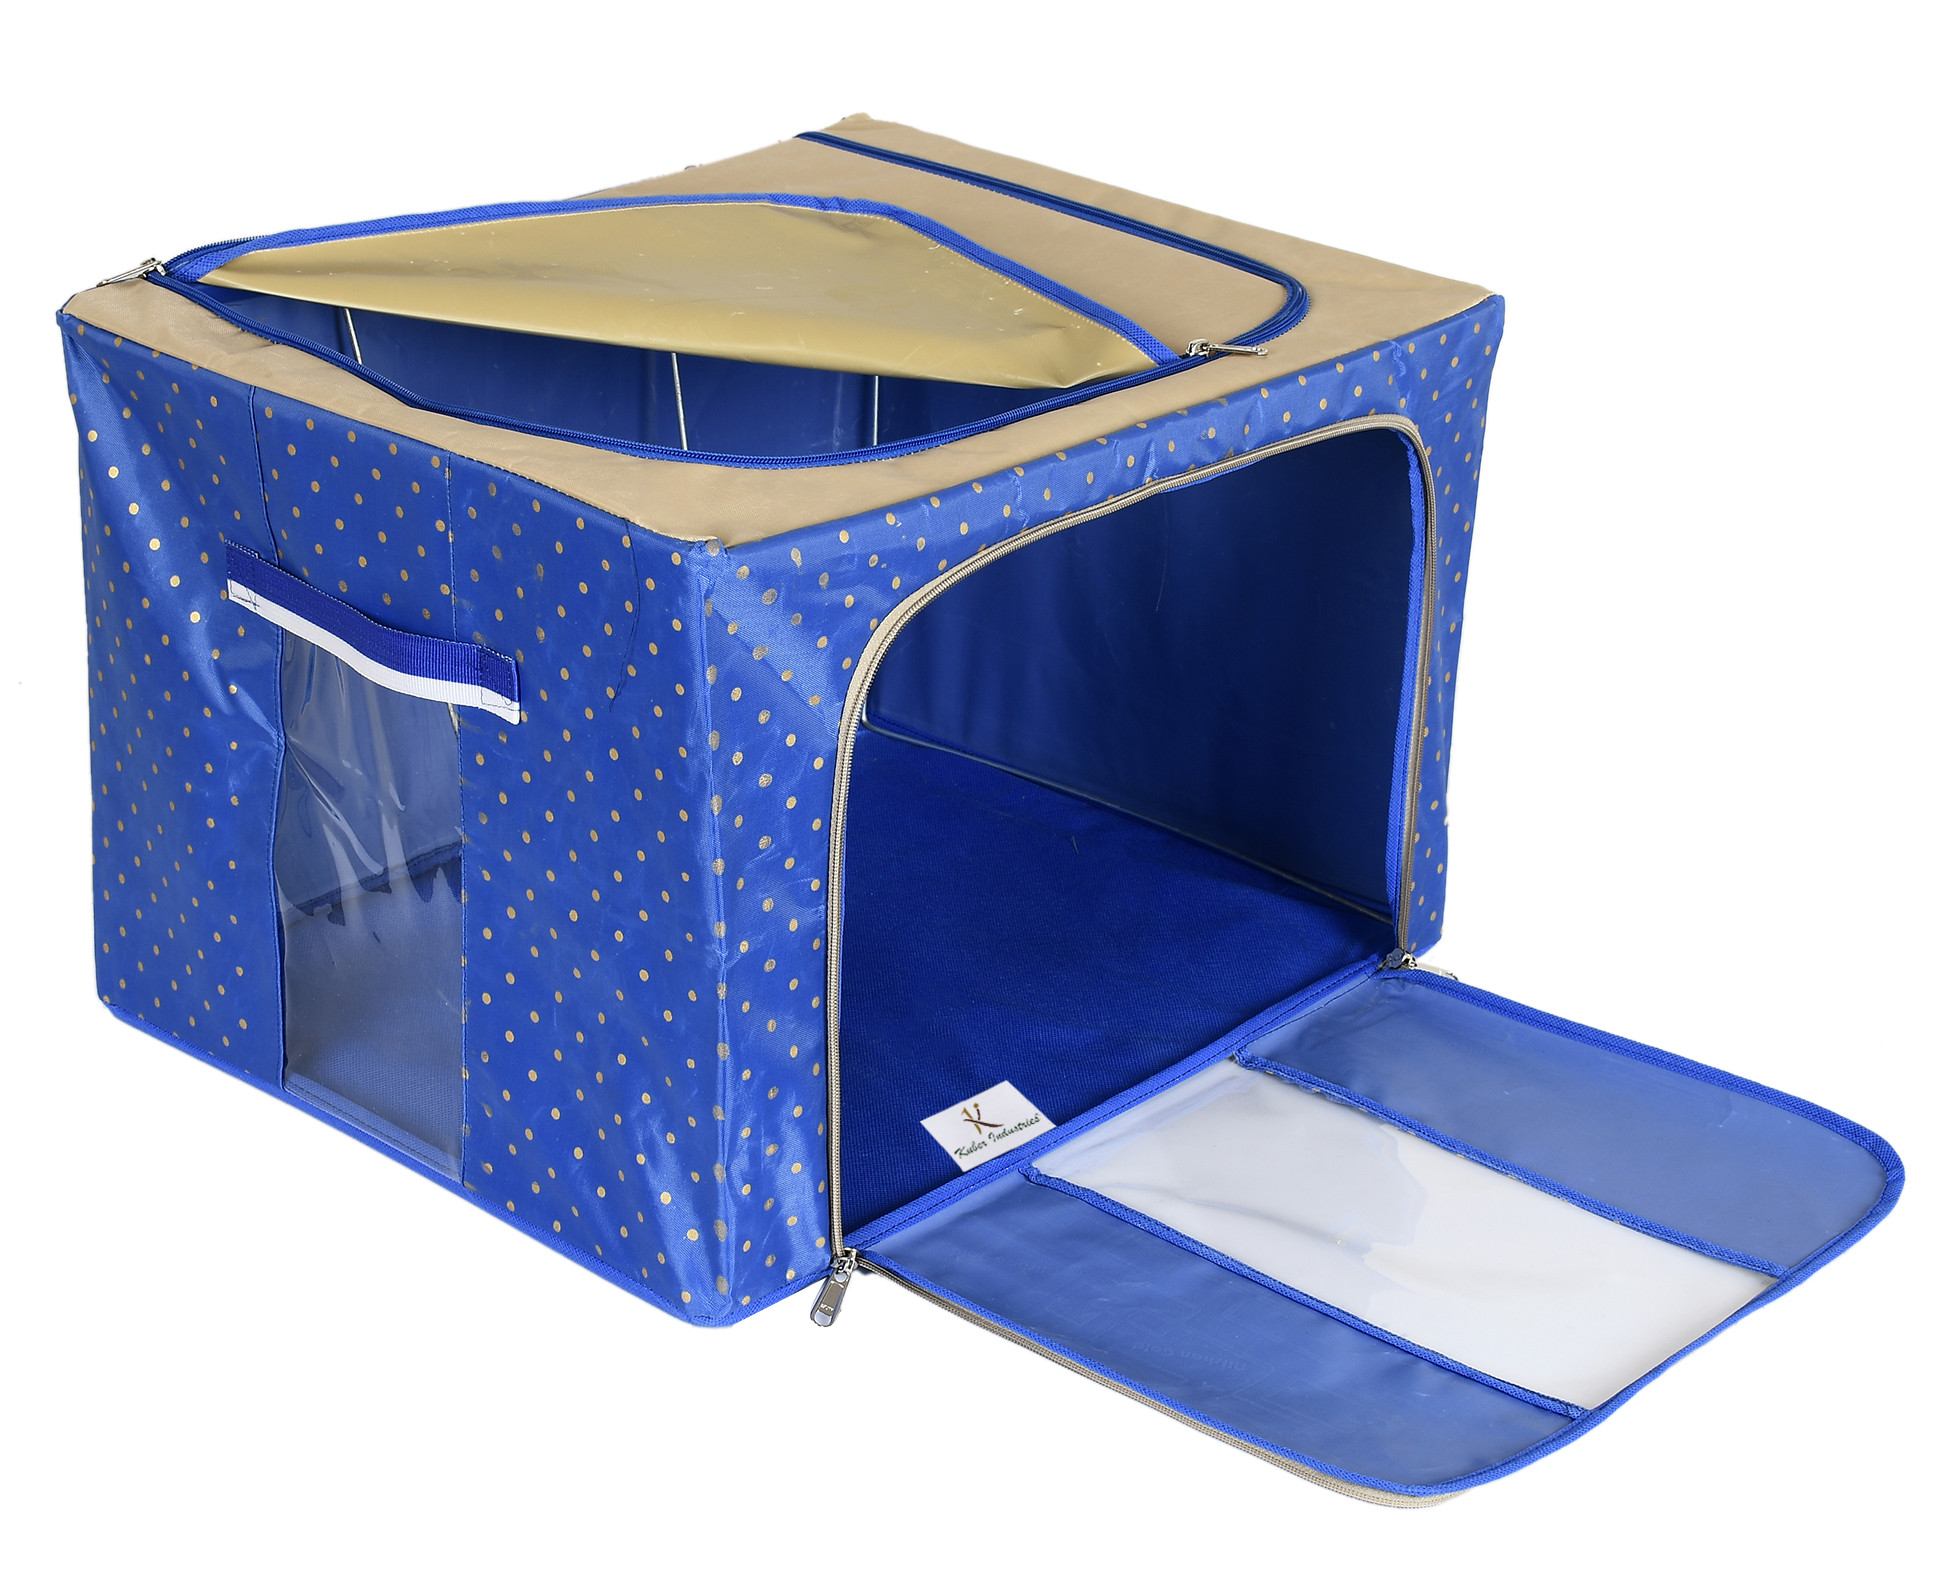 Kuber Industries Dot Printed Steel Frame Storage Box/Organizer For Clothing, Blankets, Bedding With Clear Window, 44Ltr. (Blue & Brown)-44KM0233